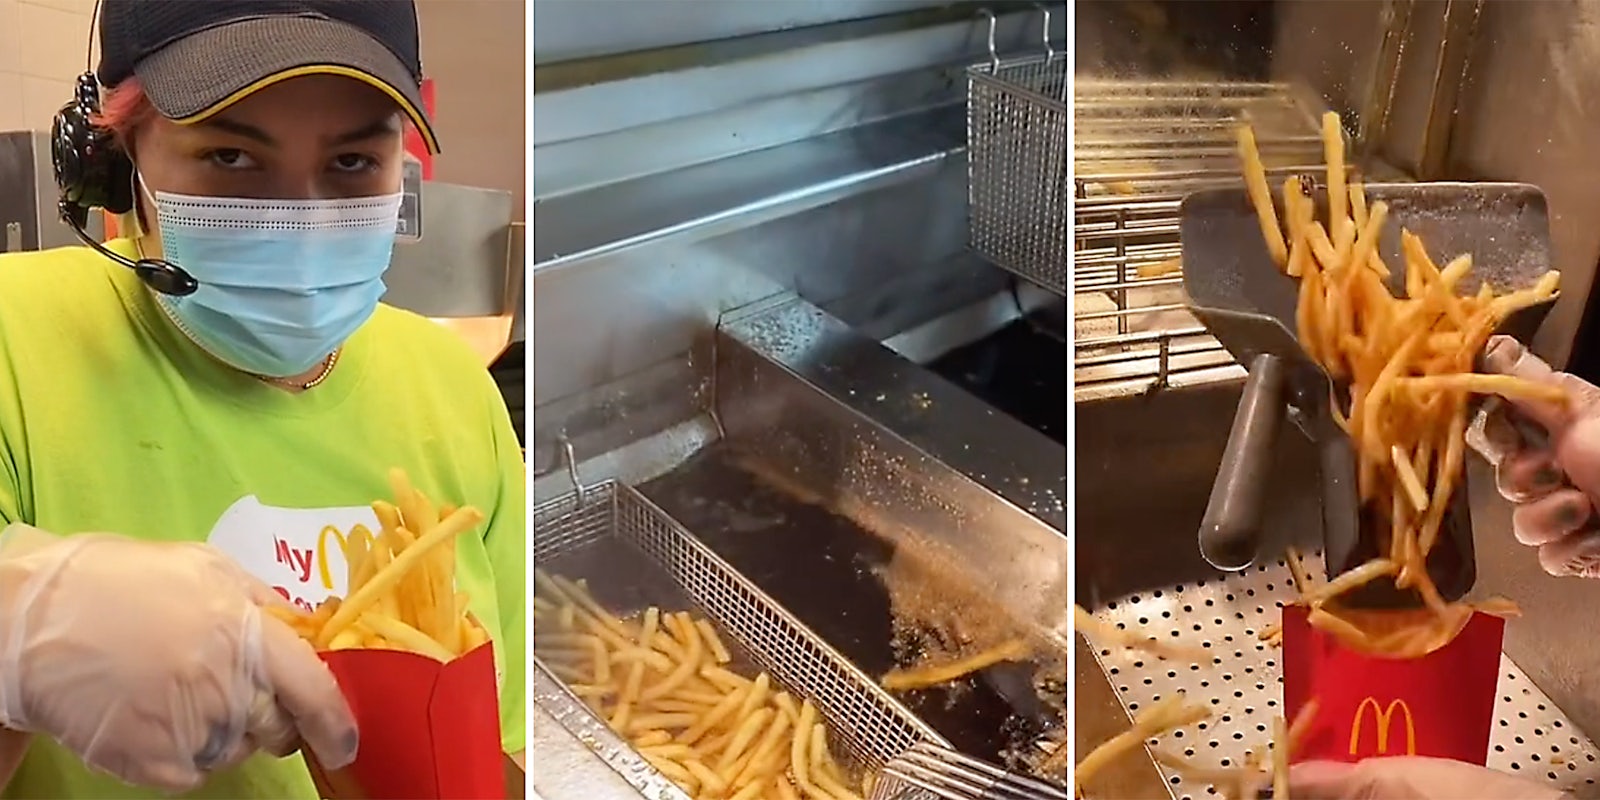 A McDonald's worker making French fries.